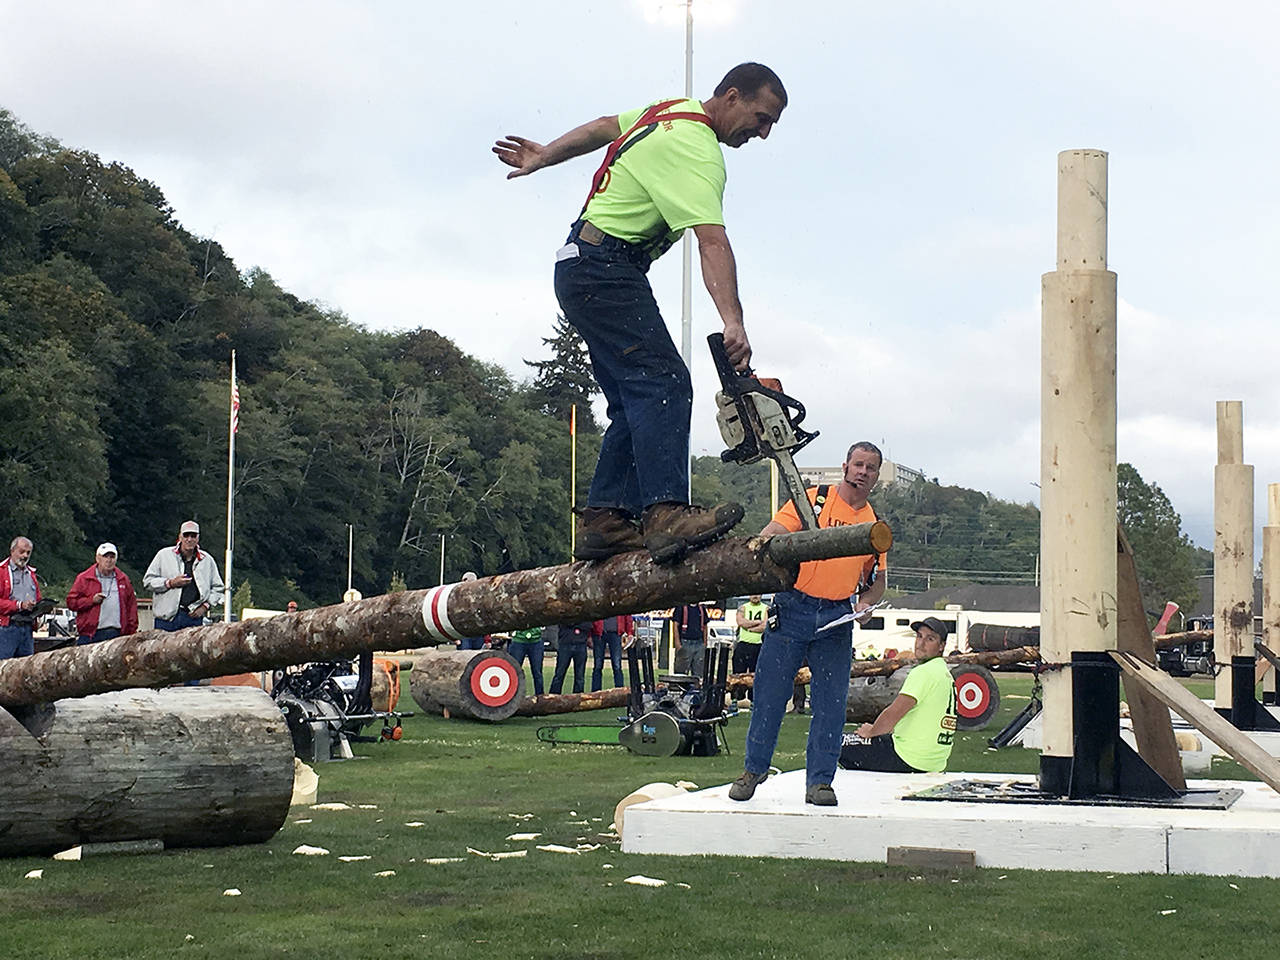 Kat Bryant | Grays Harbor News Group                                Paul Pendergraft balances on the obstacle pole during the 2018 Playday as emcee Don Bell looks on.